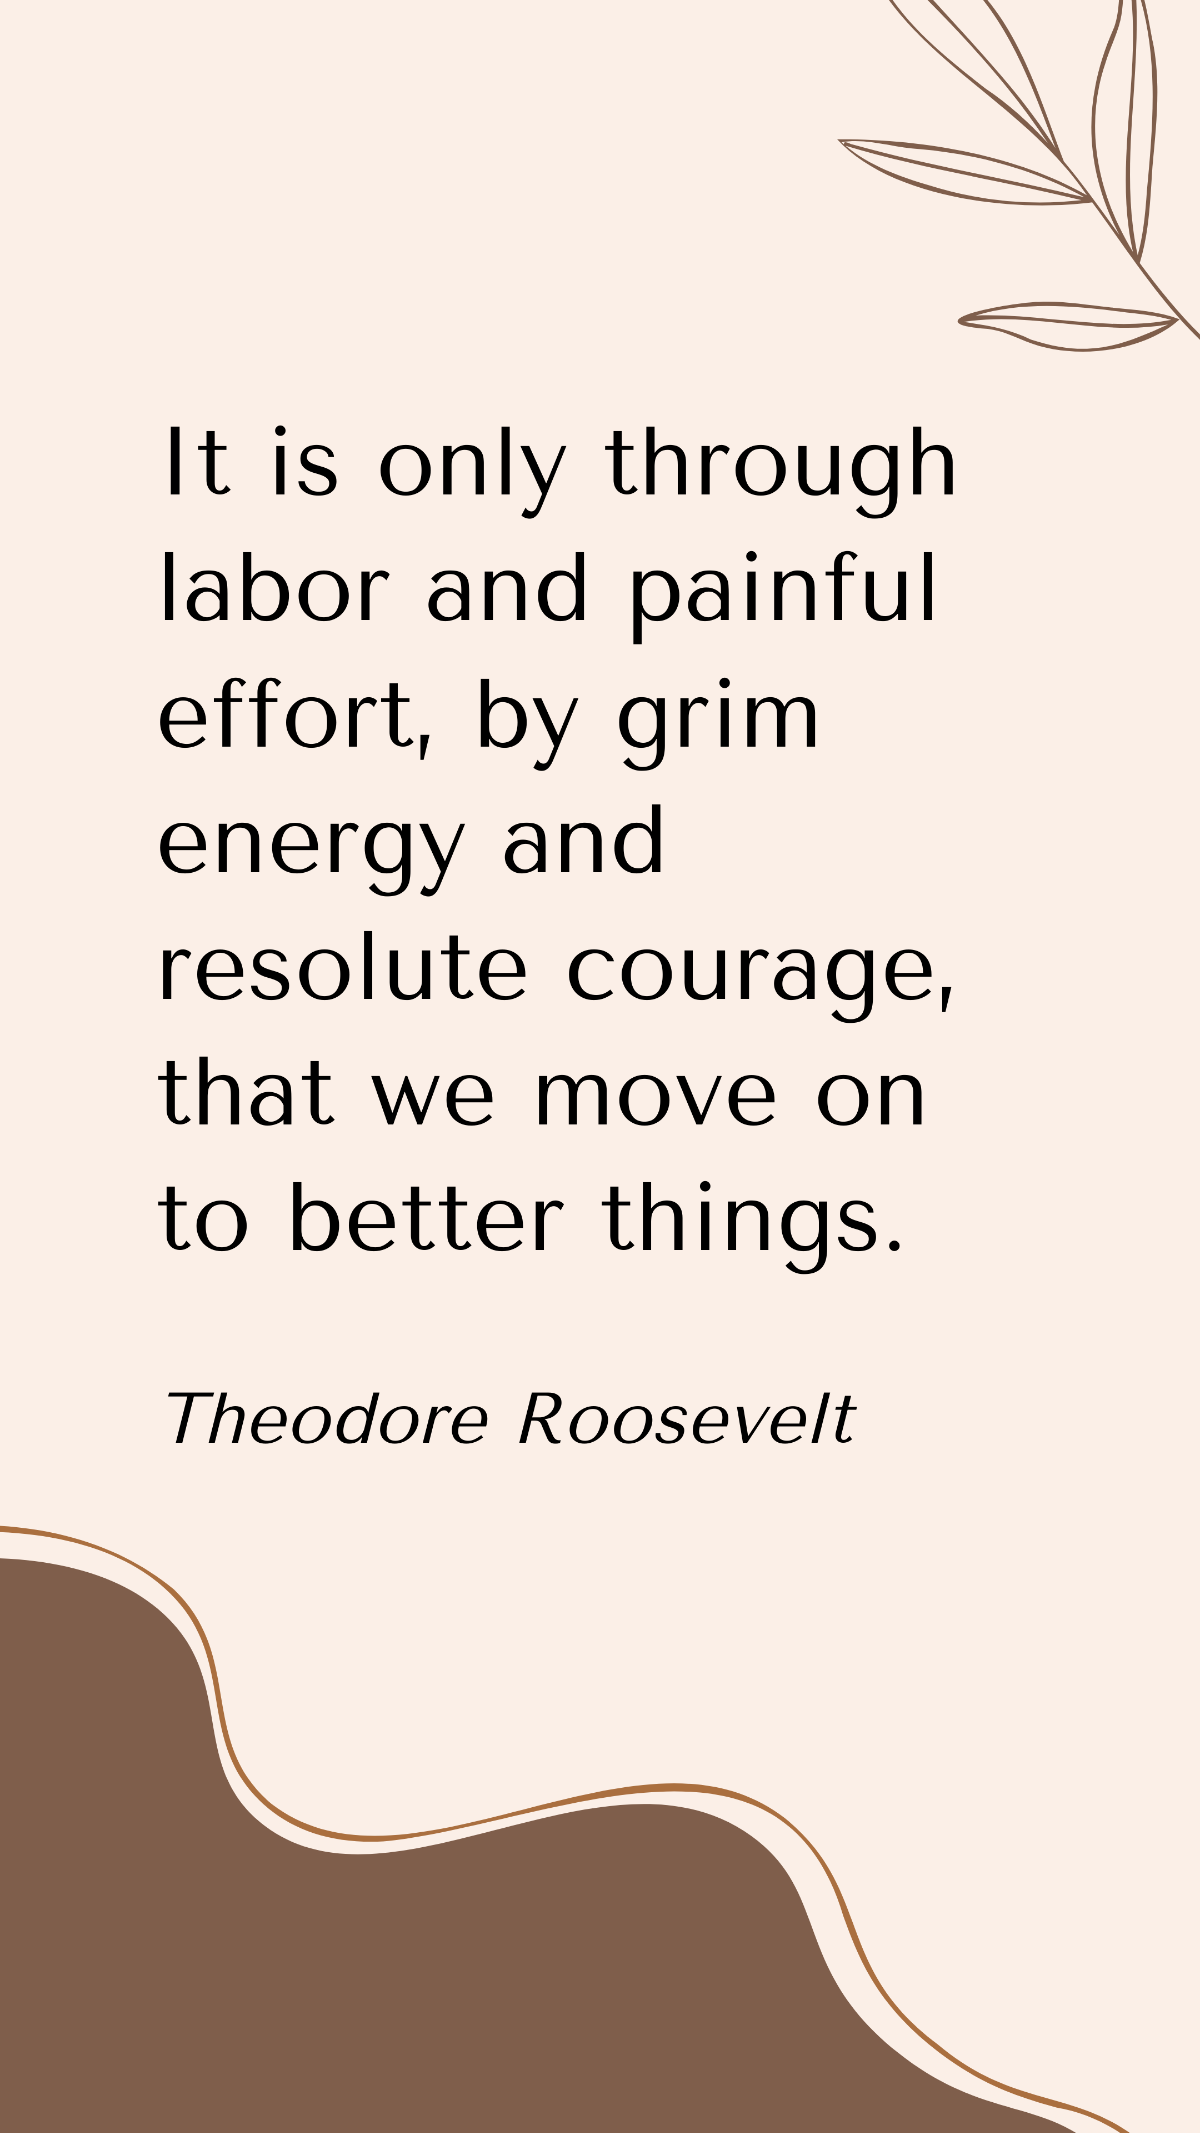 Free Theodore Roosevelt - It is only through labor and painful effort, by grim energy and resolute courage, that we move on to better things. Template